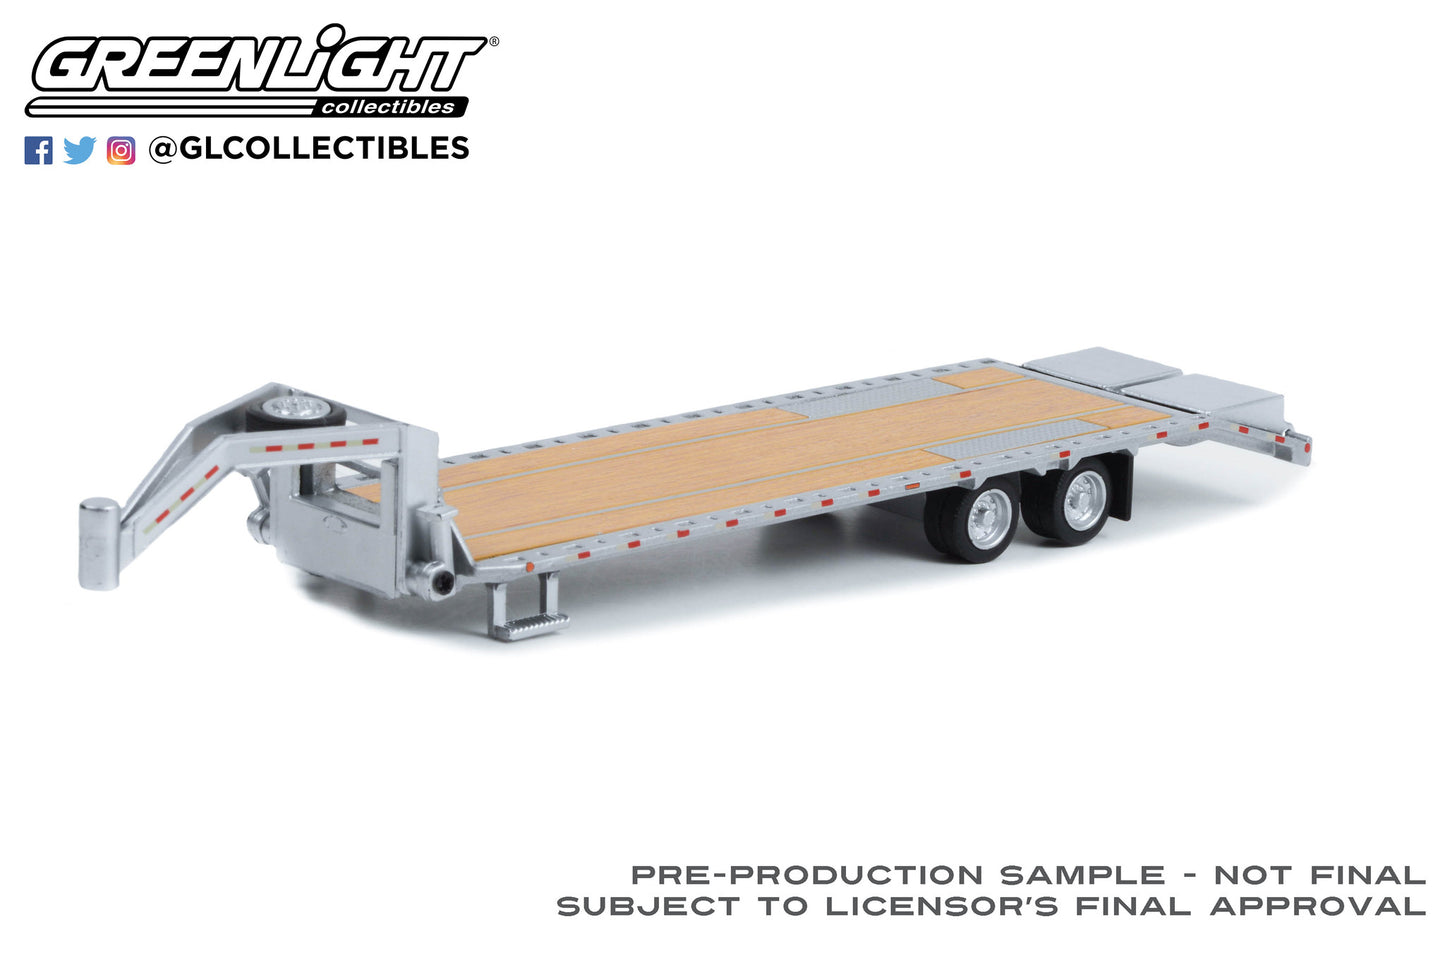 1:64 Gooseneck Trailer - Primer Gray with Red and White Conspicuity Stripes (Hobby Exclusive) : PRE ORDER ARRIVING DEC.